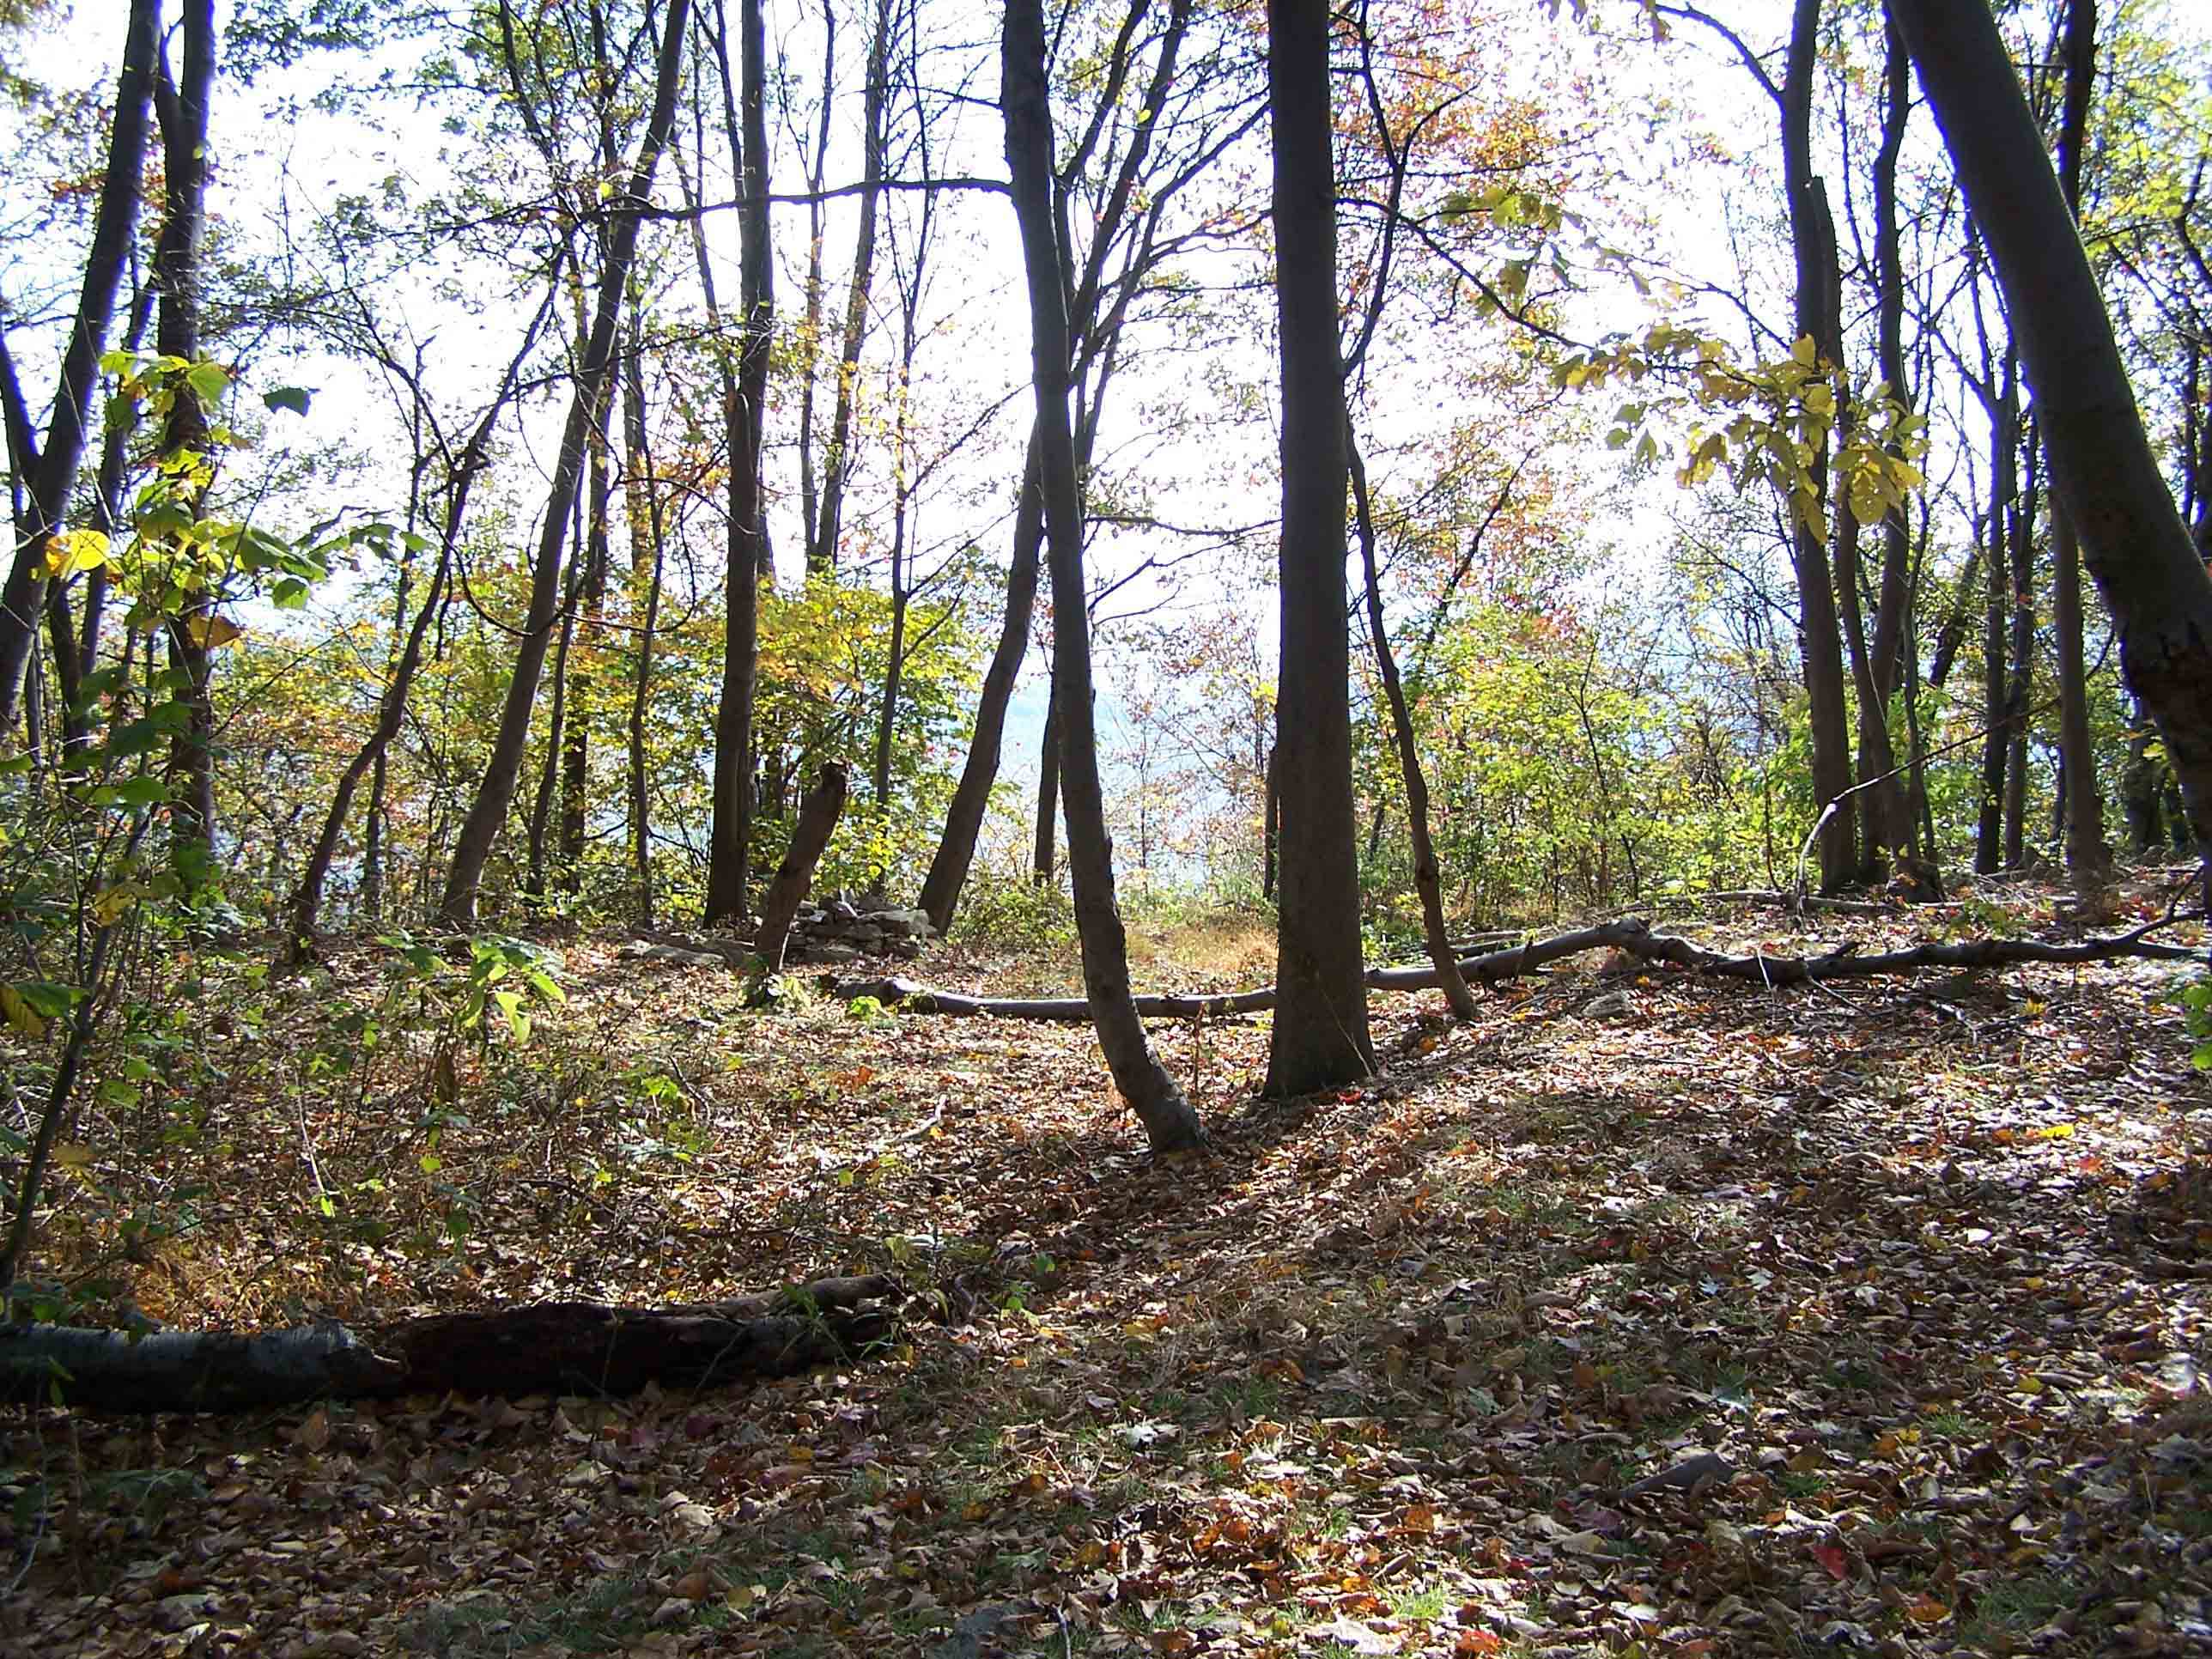 Campsites on trail north of Swatara Gap - south of William Penn Shelter. Courtesy at@rohland.org